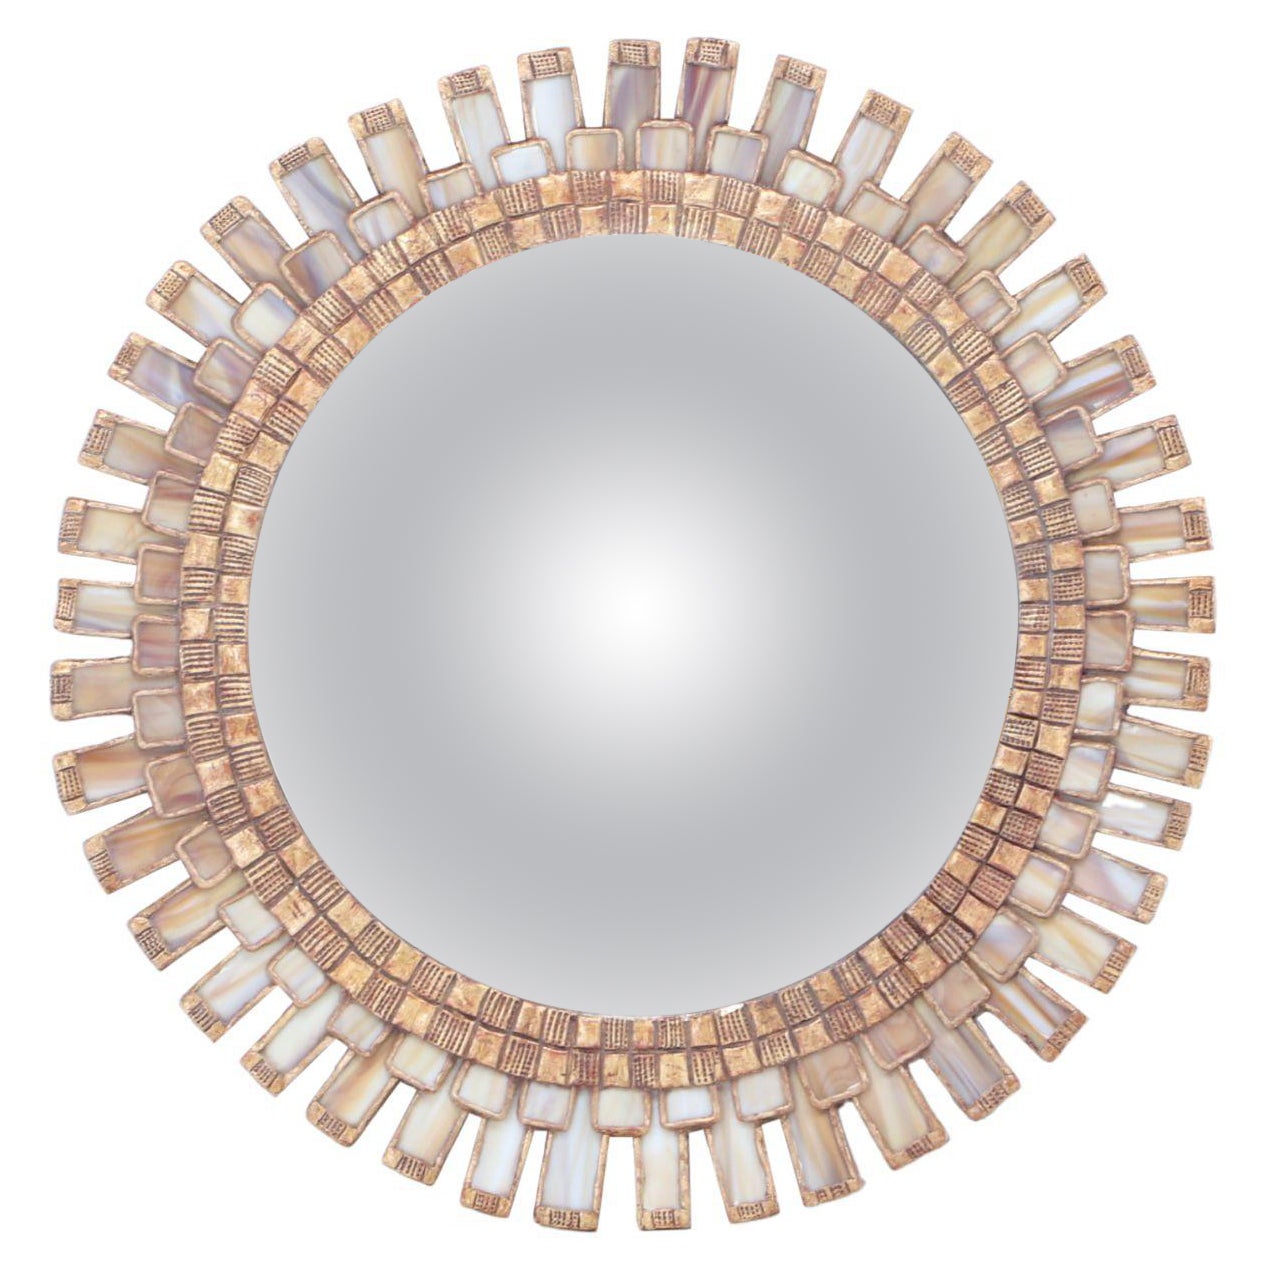 A wood and resin convex mirror having a geometric border of ivory colored glass 